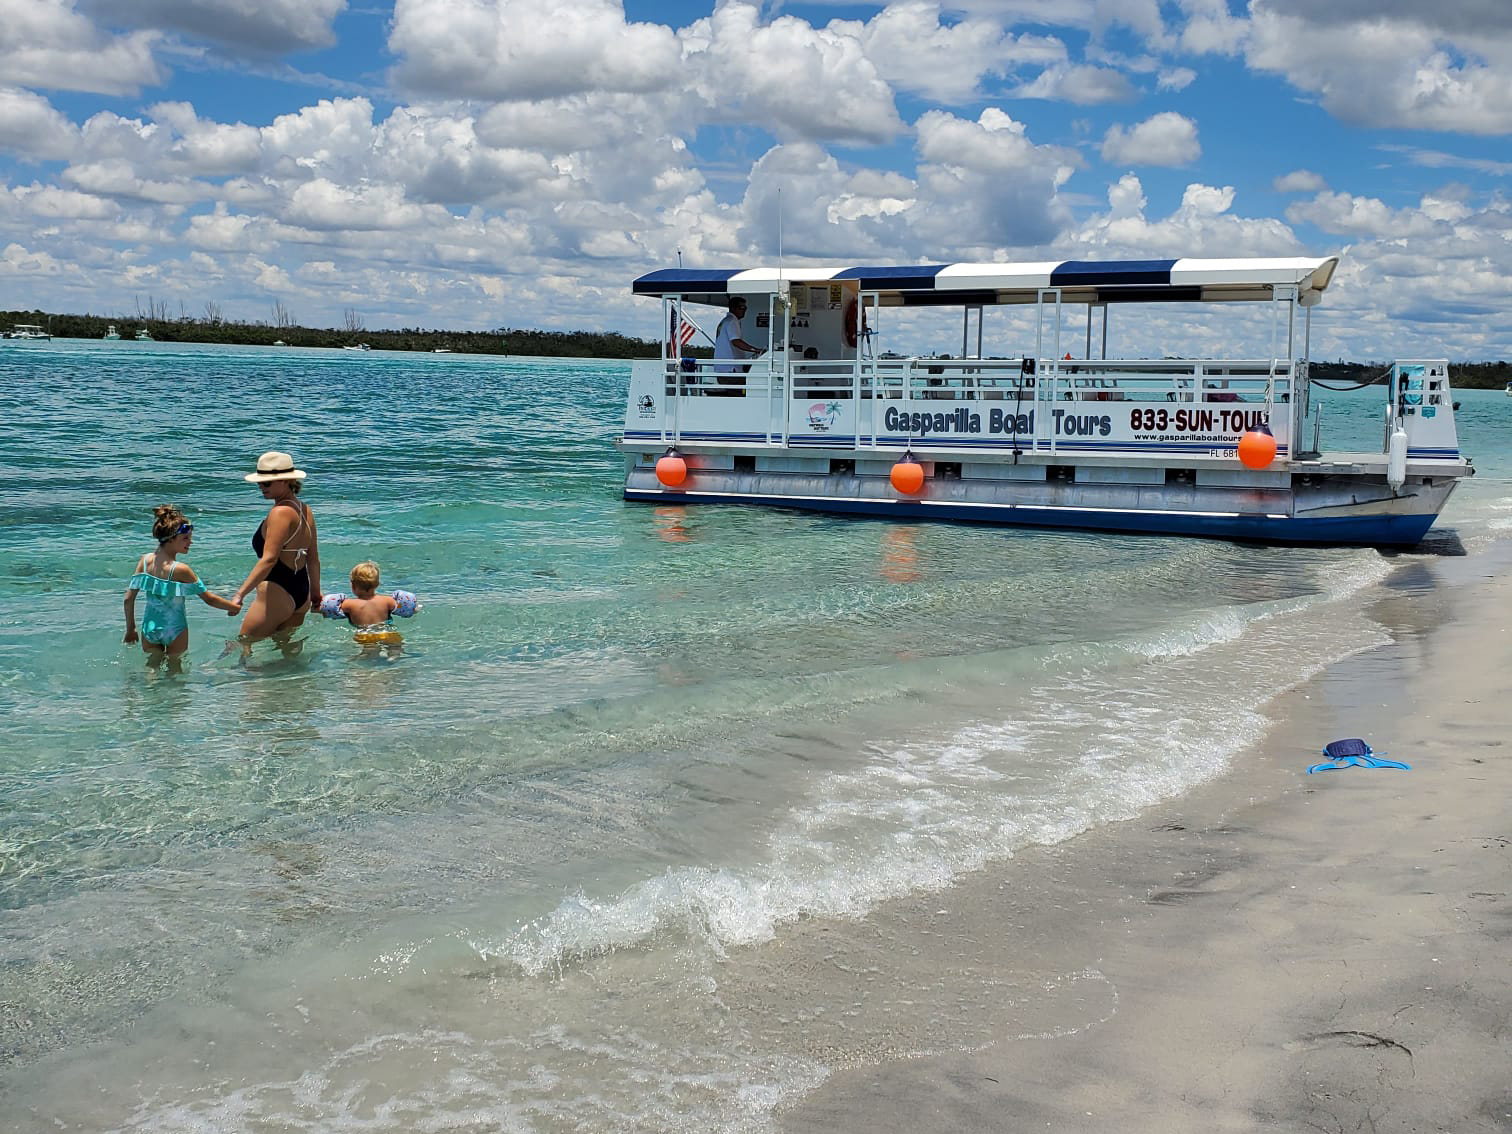 three people in the water at the beach by a gasparilla boat tours boat